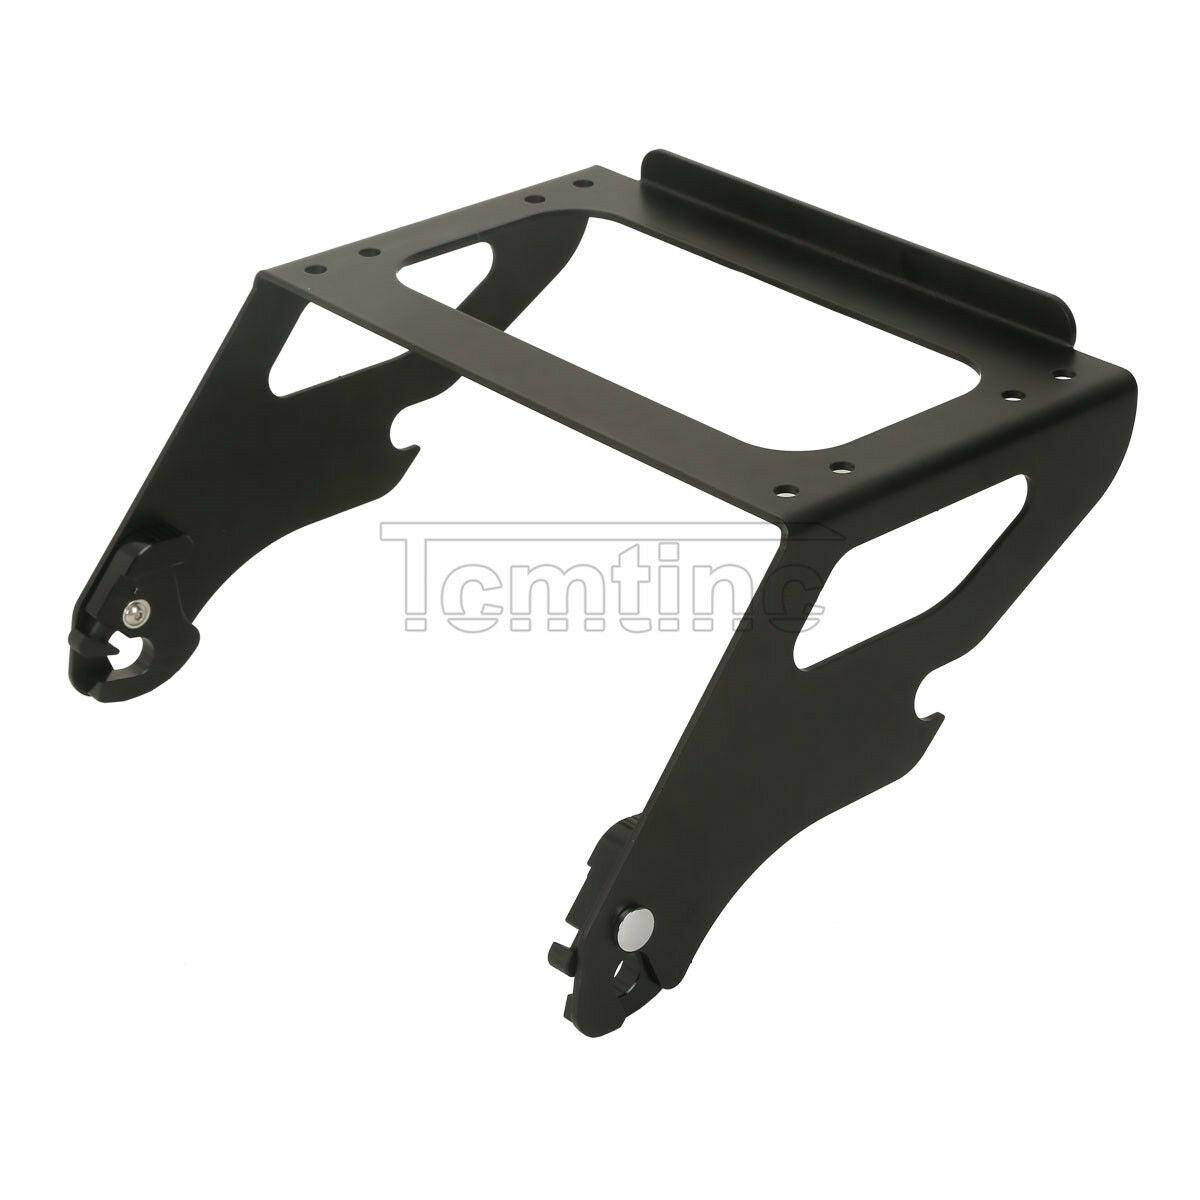 Detachable Solo Luggage Rack For Harley Touring Road King Glide Tour Pak 1997-08 - Moto Life Products